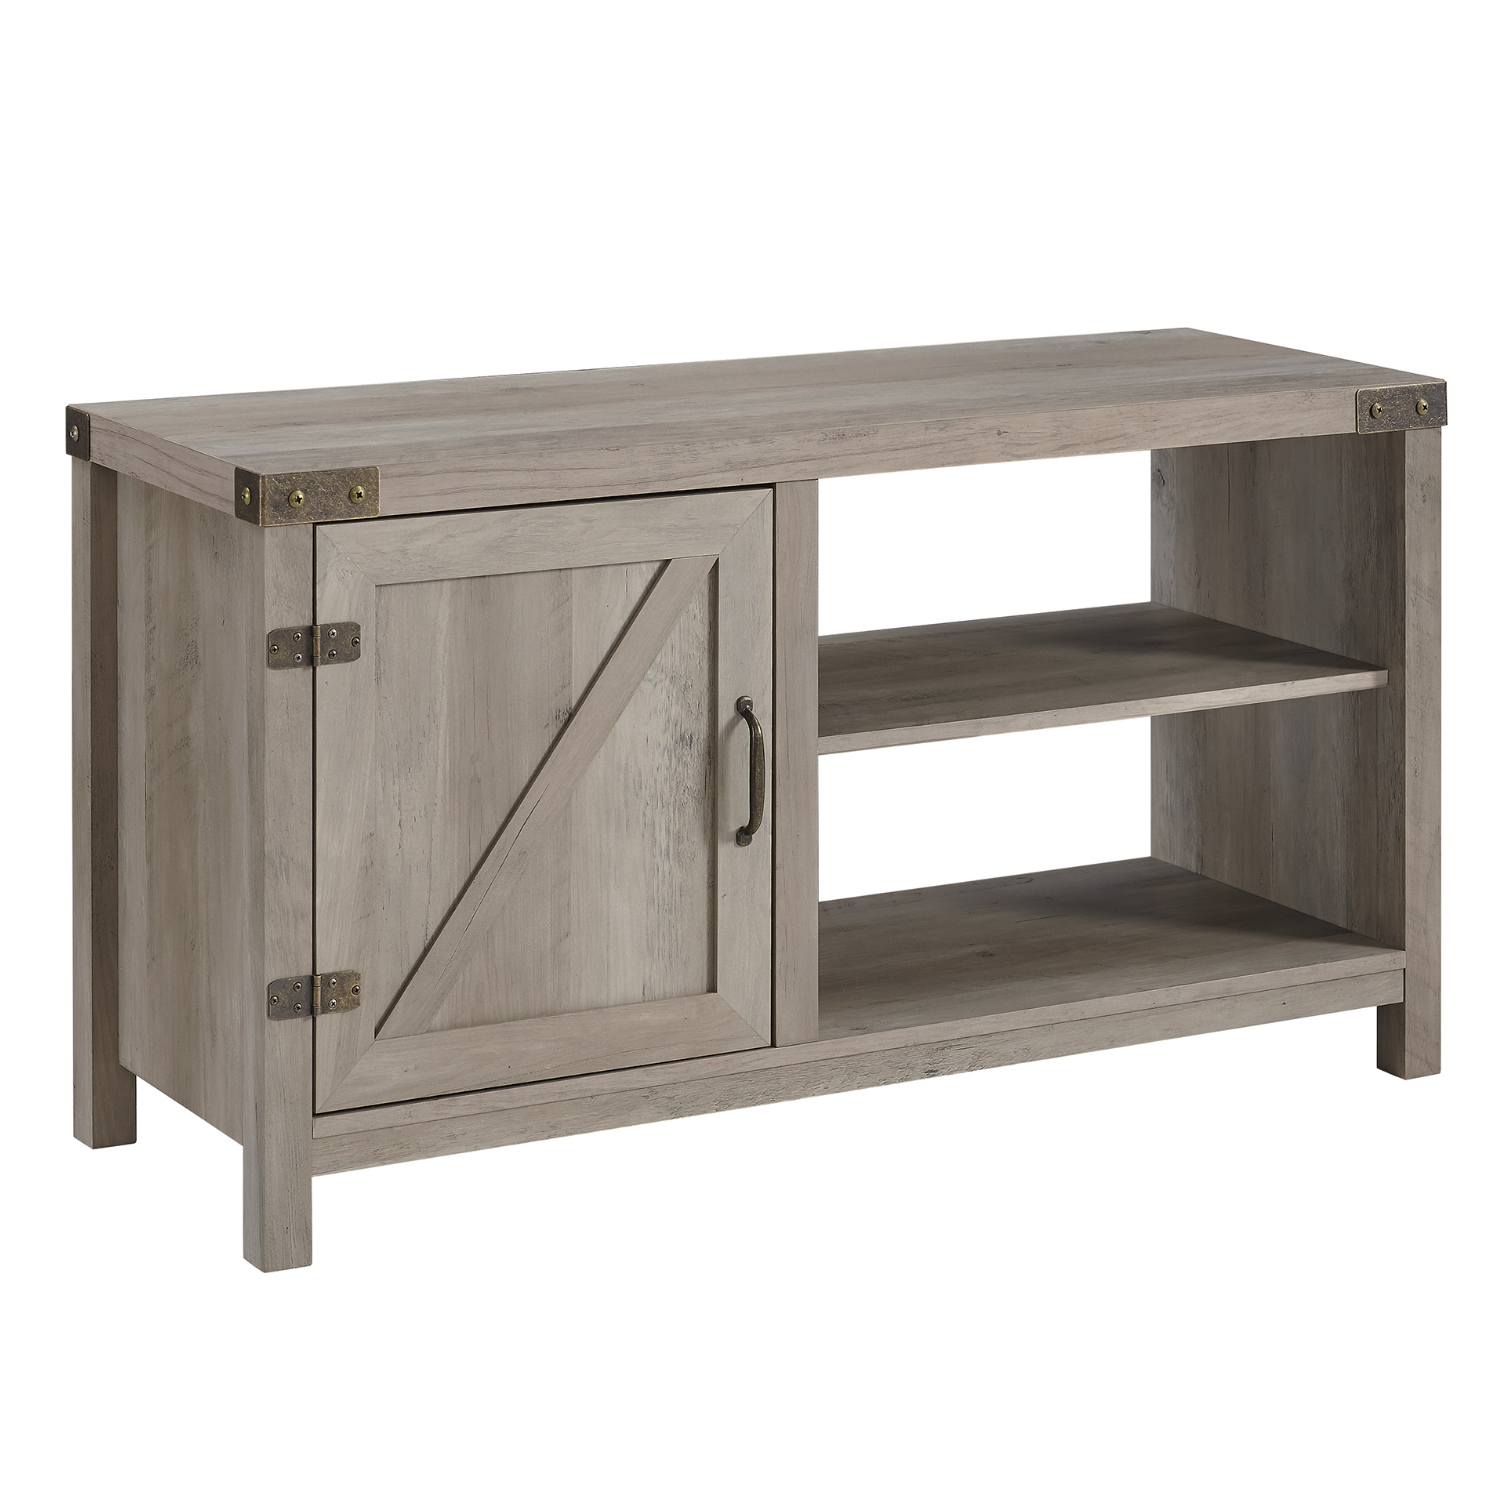 Grey Wooden Effect TV Unit with Storage - Foster - TV's up to 50 ...